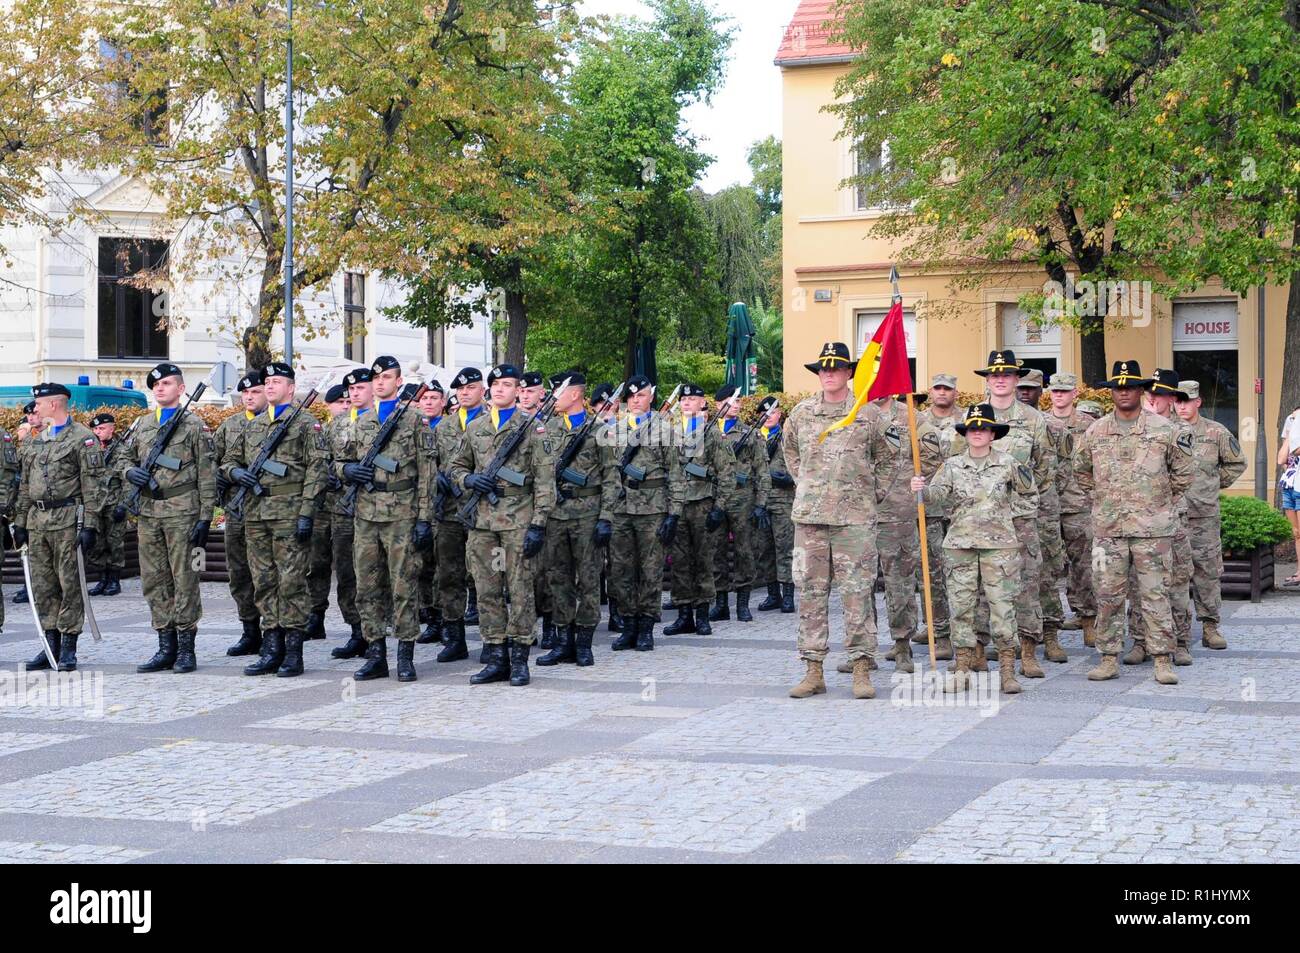 Soldiers assigned to Headquarters and Headquarters Company, 1st Armored Brigade Combat Team, 1st Cavalry Division, stand in formation alongside the Polish 11th 'Lubuska' Armoured Cavalry Division soldiers during a ceremony to observe the Black Division Day in Zielona Gora, Poland, Sept. 21, 2018. The 11th Lubuska ACD, also known as The Black Division, honors this military holiday as a commemoration of the battle of Vienna when its commander, King John III Sobieski, led forces to defeat the Turkish army of the Ottoman Empire in September 1683. Stock Photo